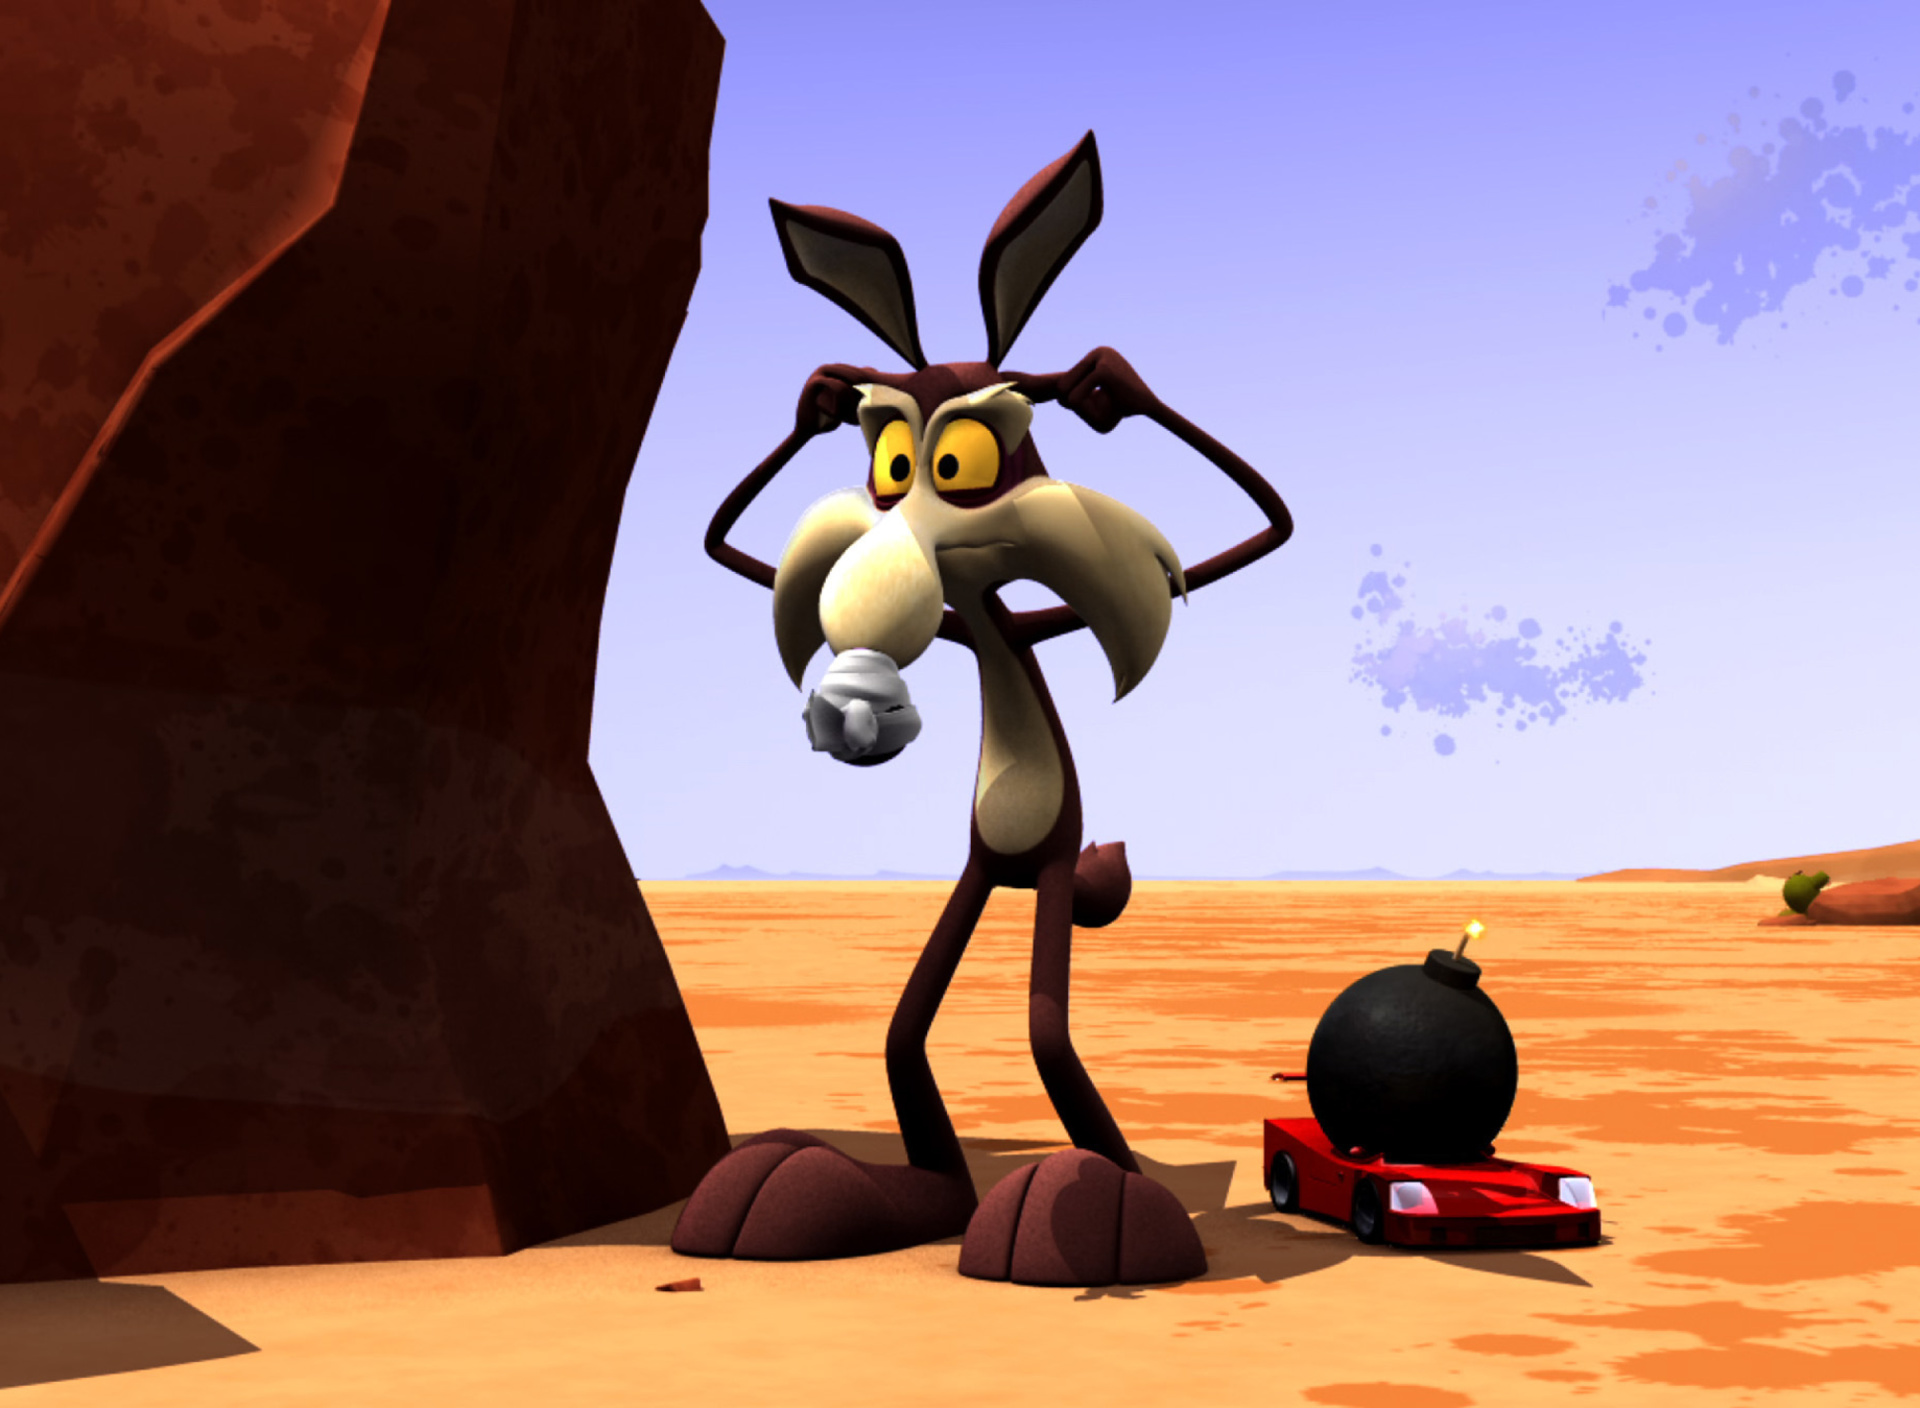 Das Wile E Coyote and Road Runner Wallpaper 1920x1408